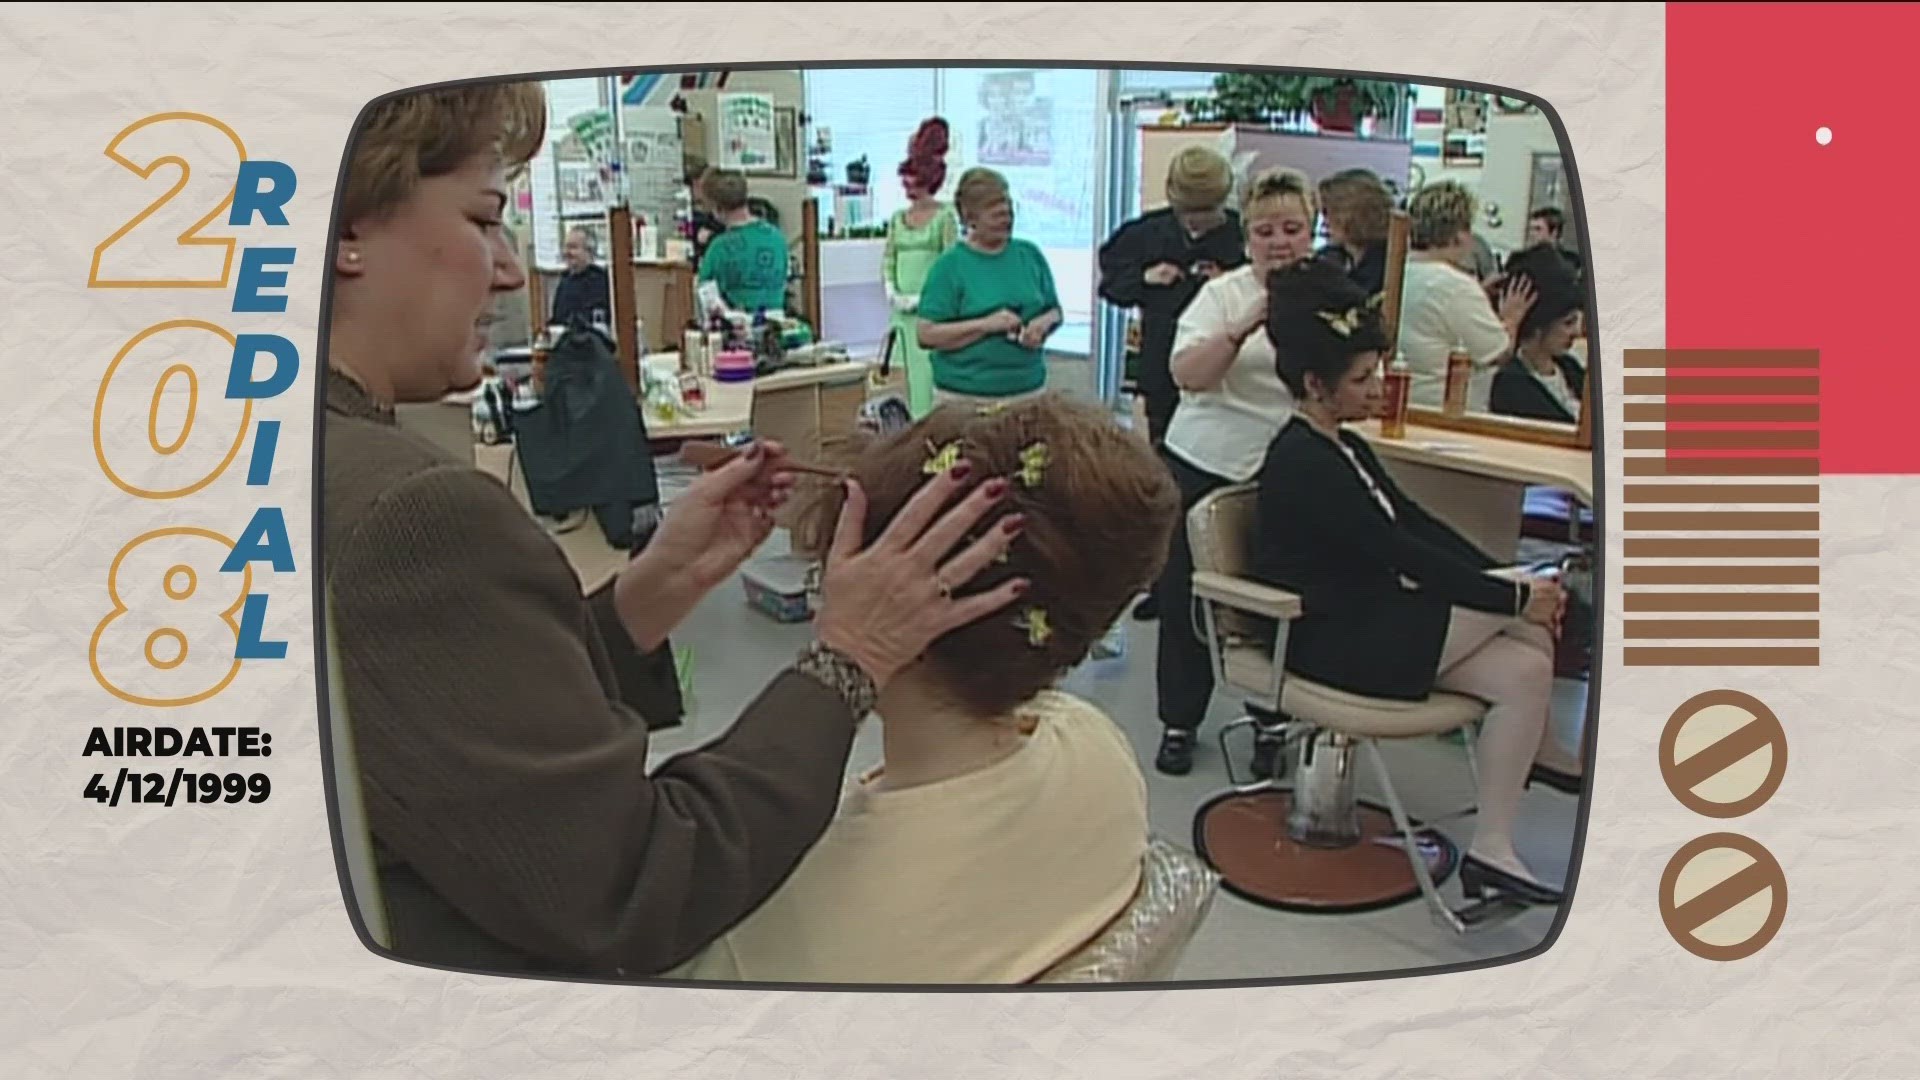 The 208 returns to 1999 to highlight a story of the return of the beehive hairstyle.